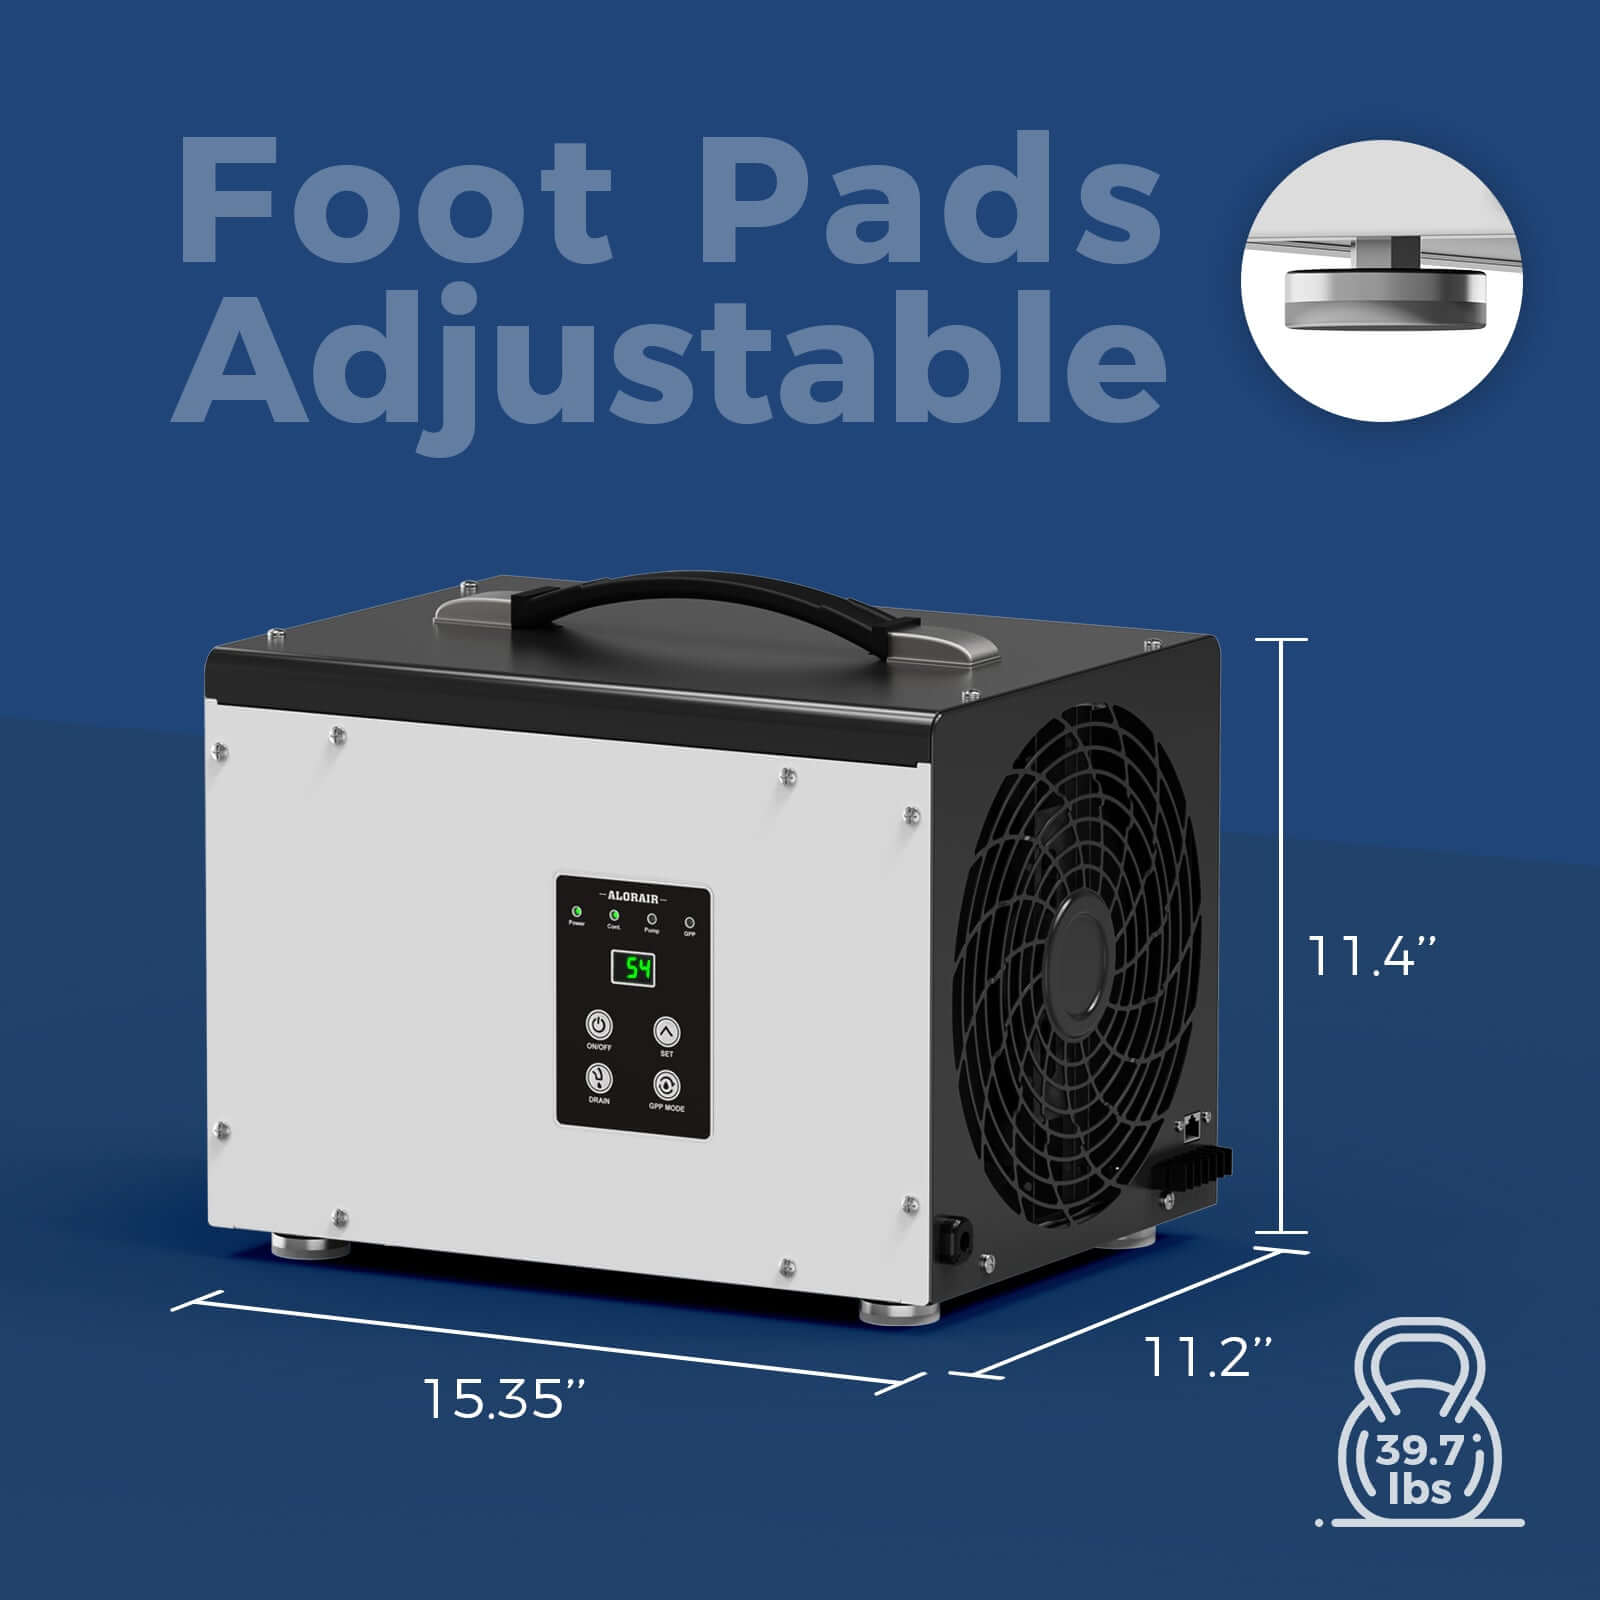 AlorAir HD35P Dehumidifier with 11.2"x11.4"x15.35" Dimensions and Adjustable Foot Pads